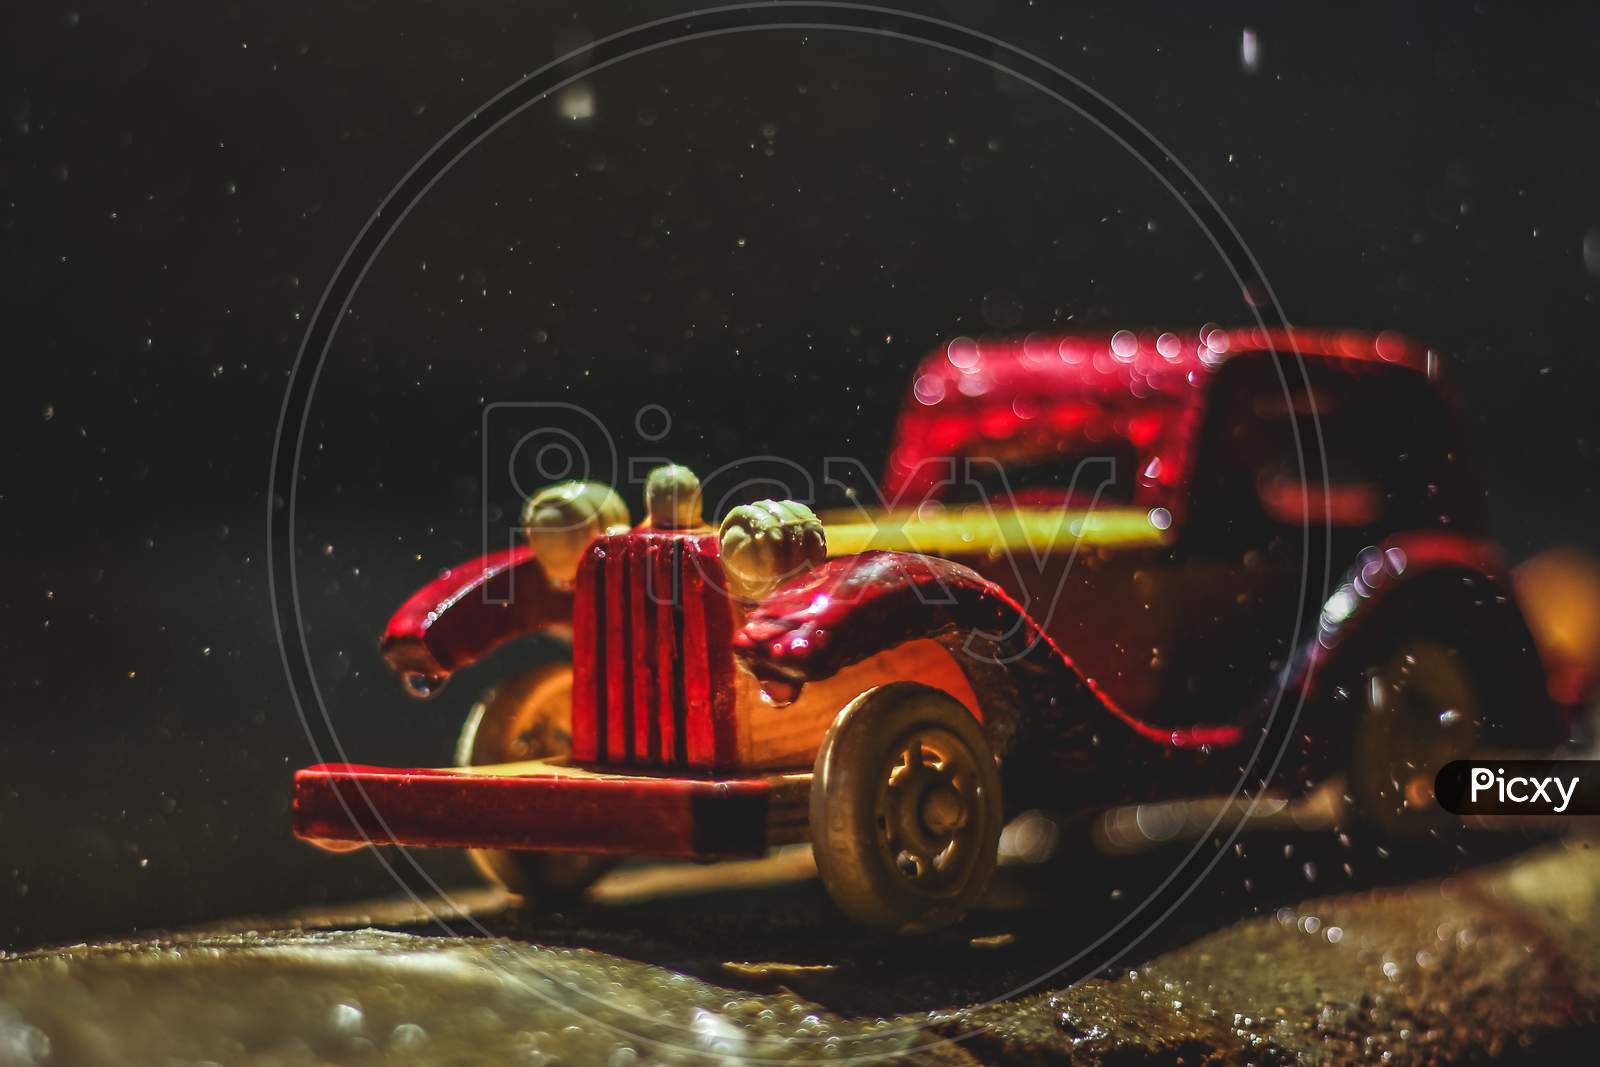 Vintage Toy Car Under The Rain On The Road. Miniature Car Toy In Rain. Red And Yellow Vintage Car On Rain. Rain Falling On Vintage Car Toy Close Up